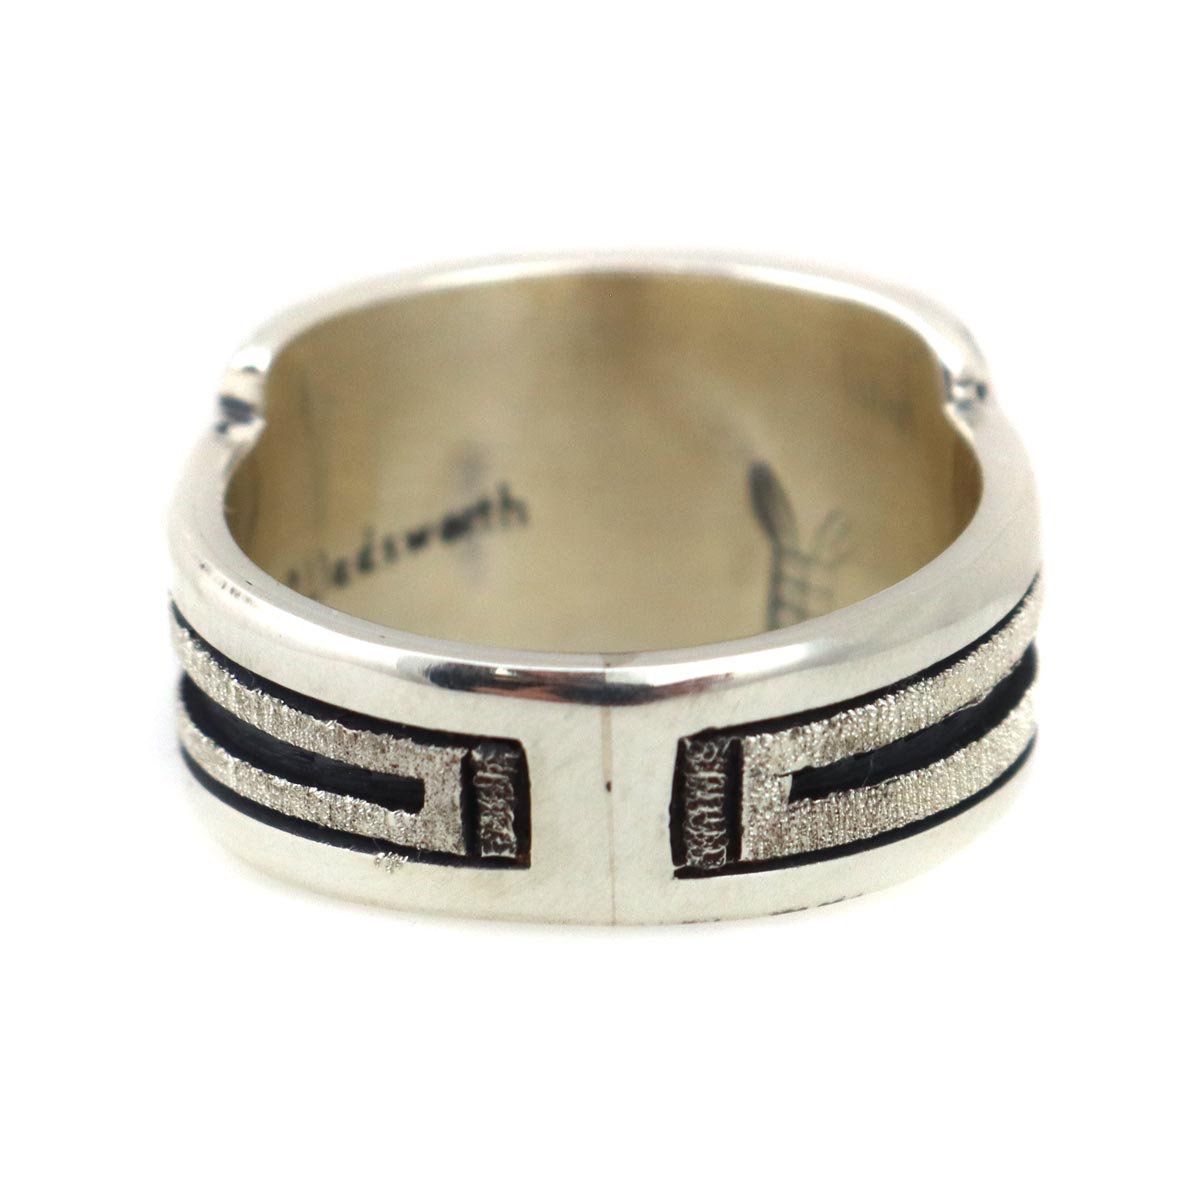 Ronald Wadsworth - Hopi Contemporary Sterling Silver Overlay Ring with Sunface Kachina Design, size 8 (J14777) 2
